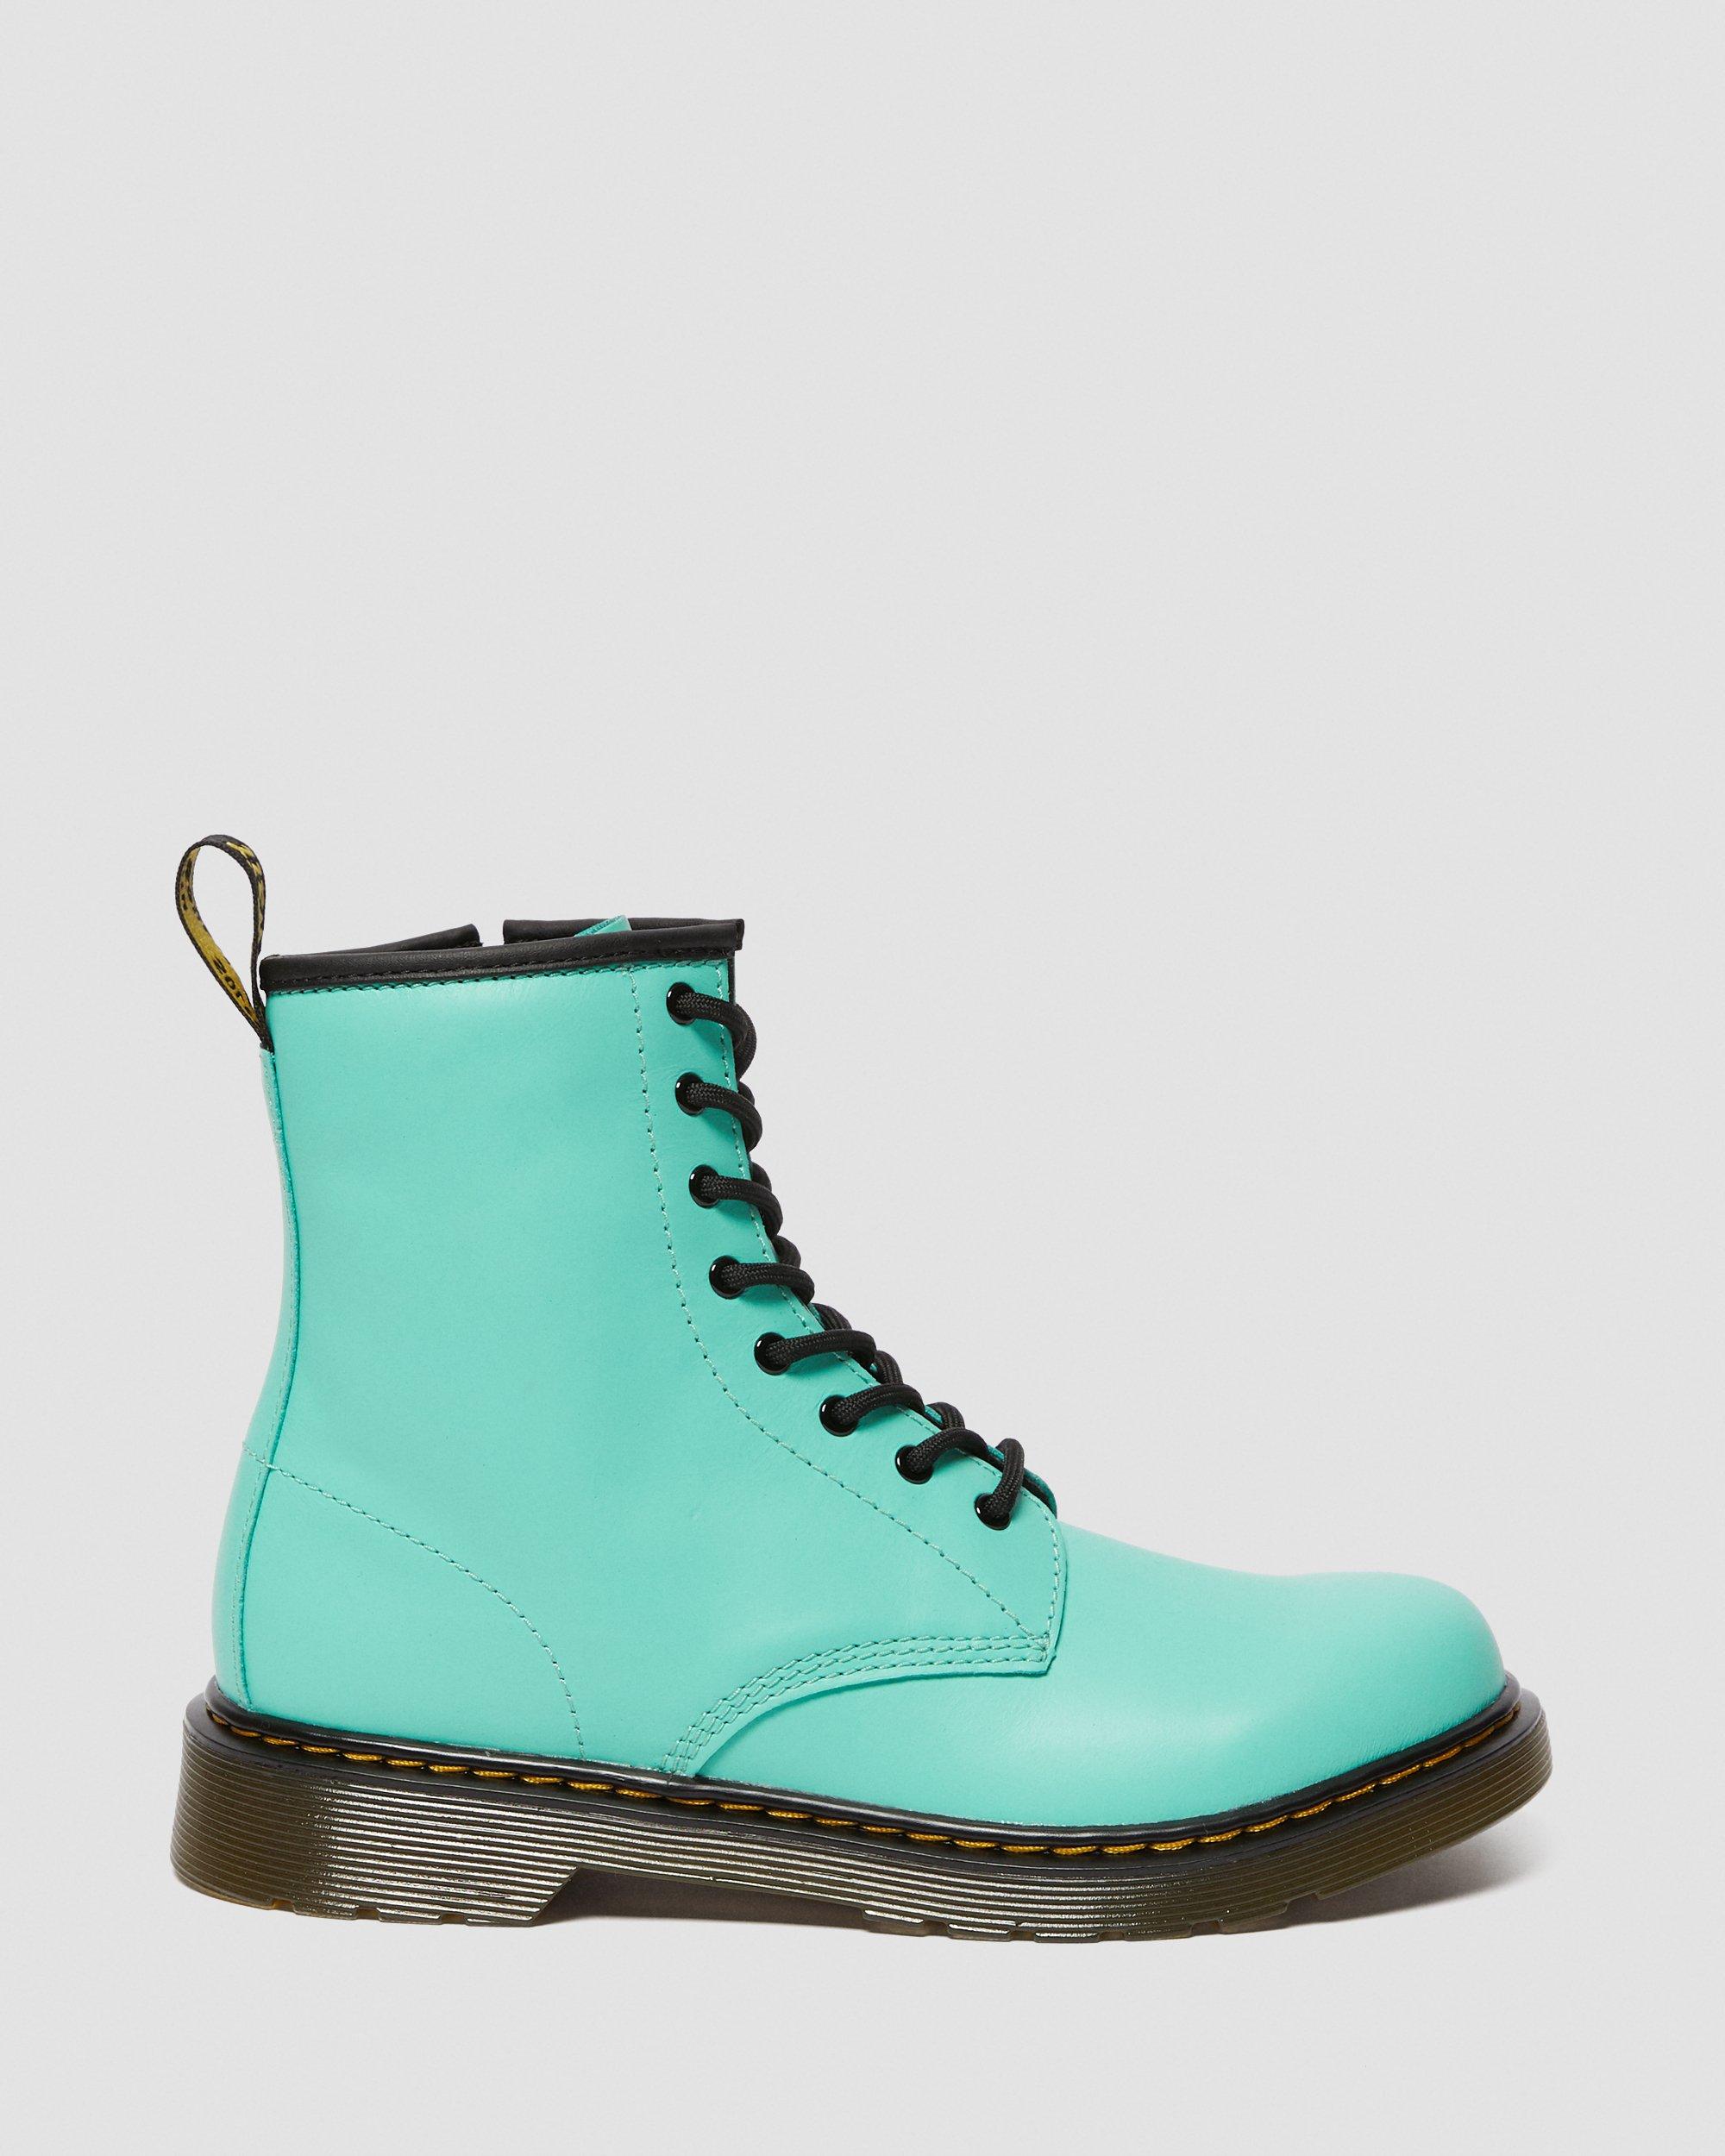 Youth 1460 Leather Lace Up Boots in Peppermint Green